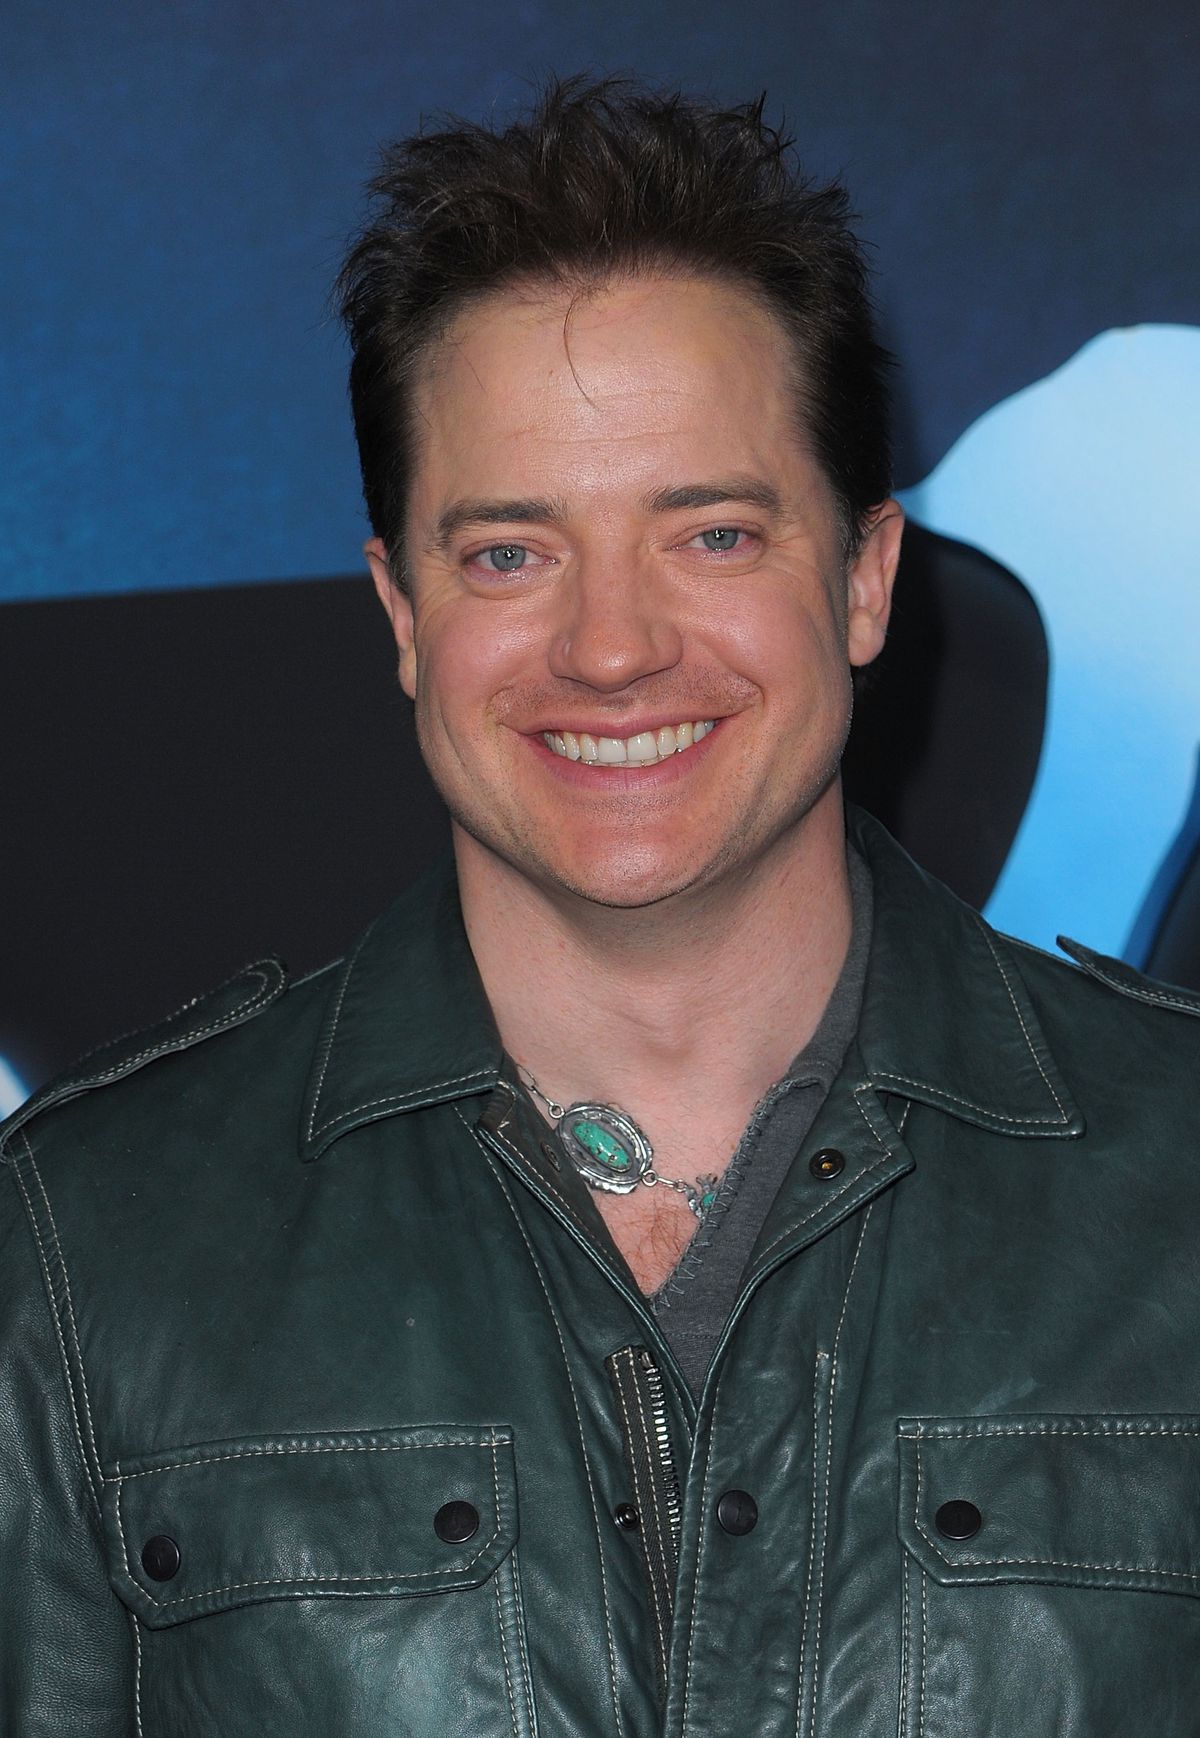 Brendan Fraser&nbsp;wearing a big green necklace and leather jacket at the Avatar premiere